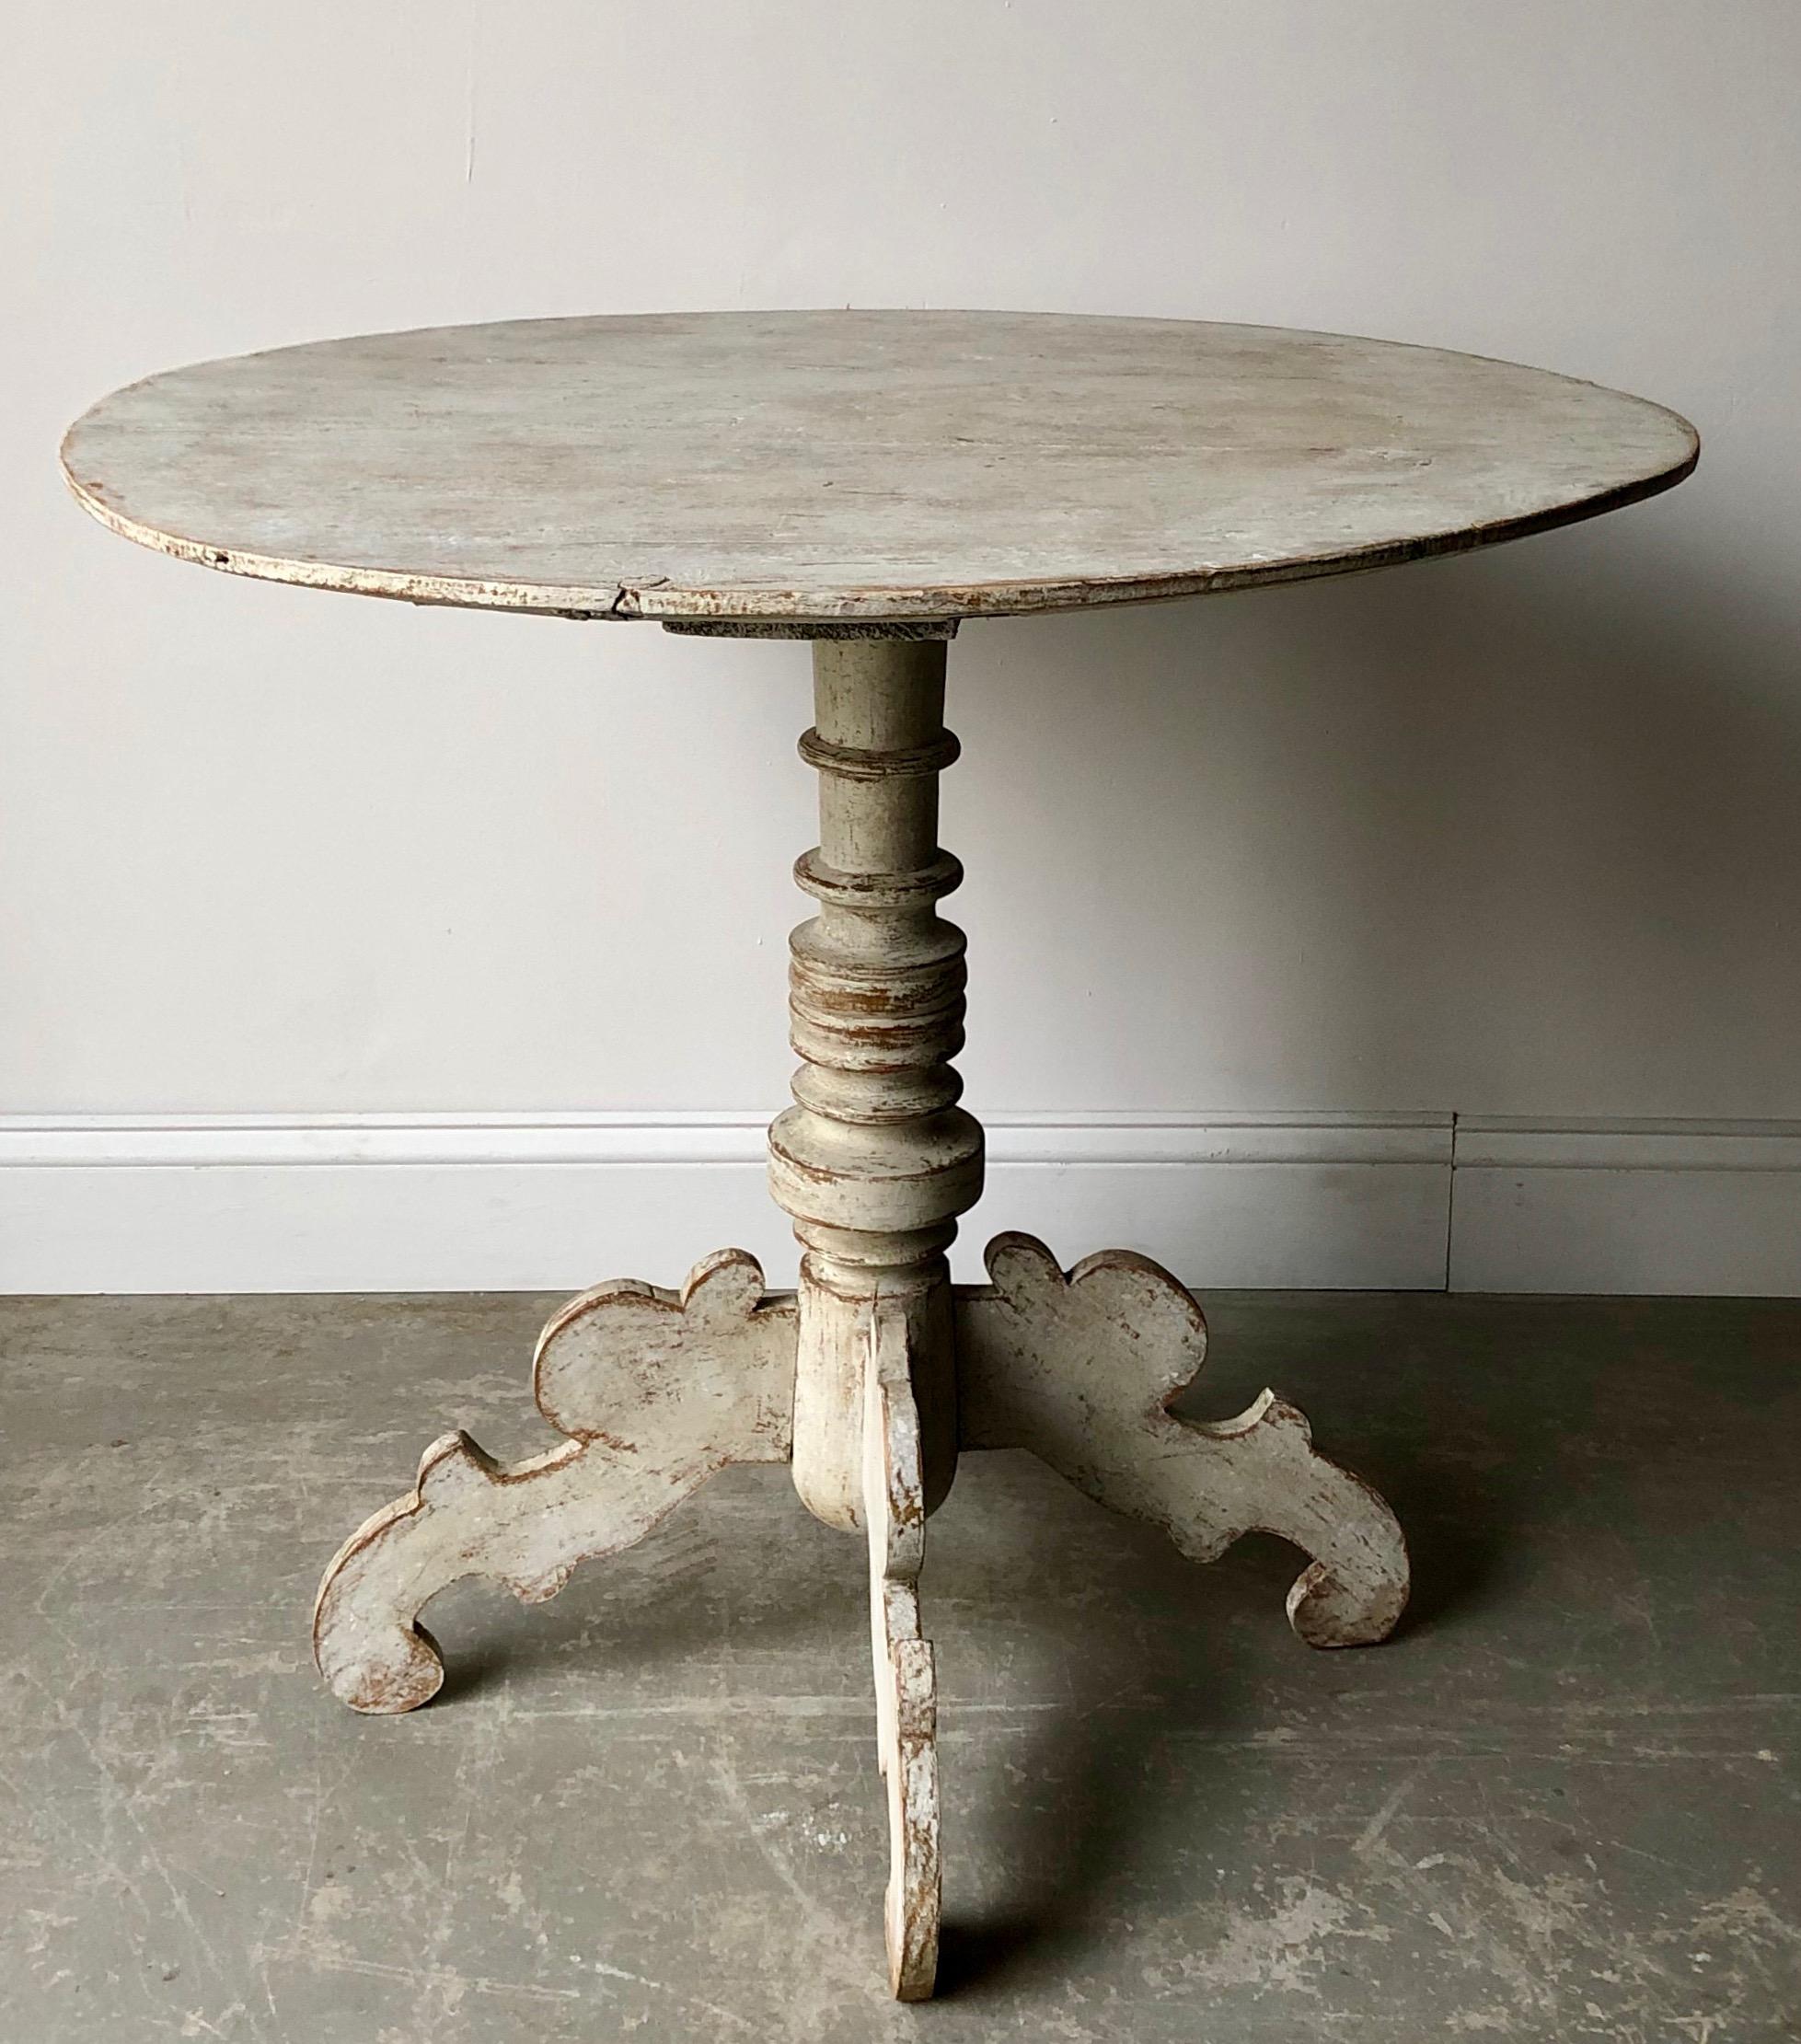 A charming large round pedestal table with turned base supported by beautifully carved legs.
Värmland, Sweden, circa 1840-1850.
More than ever, we selected the best, the rarest, the unusual, the spectacular, the most charming, what makes people